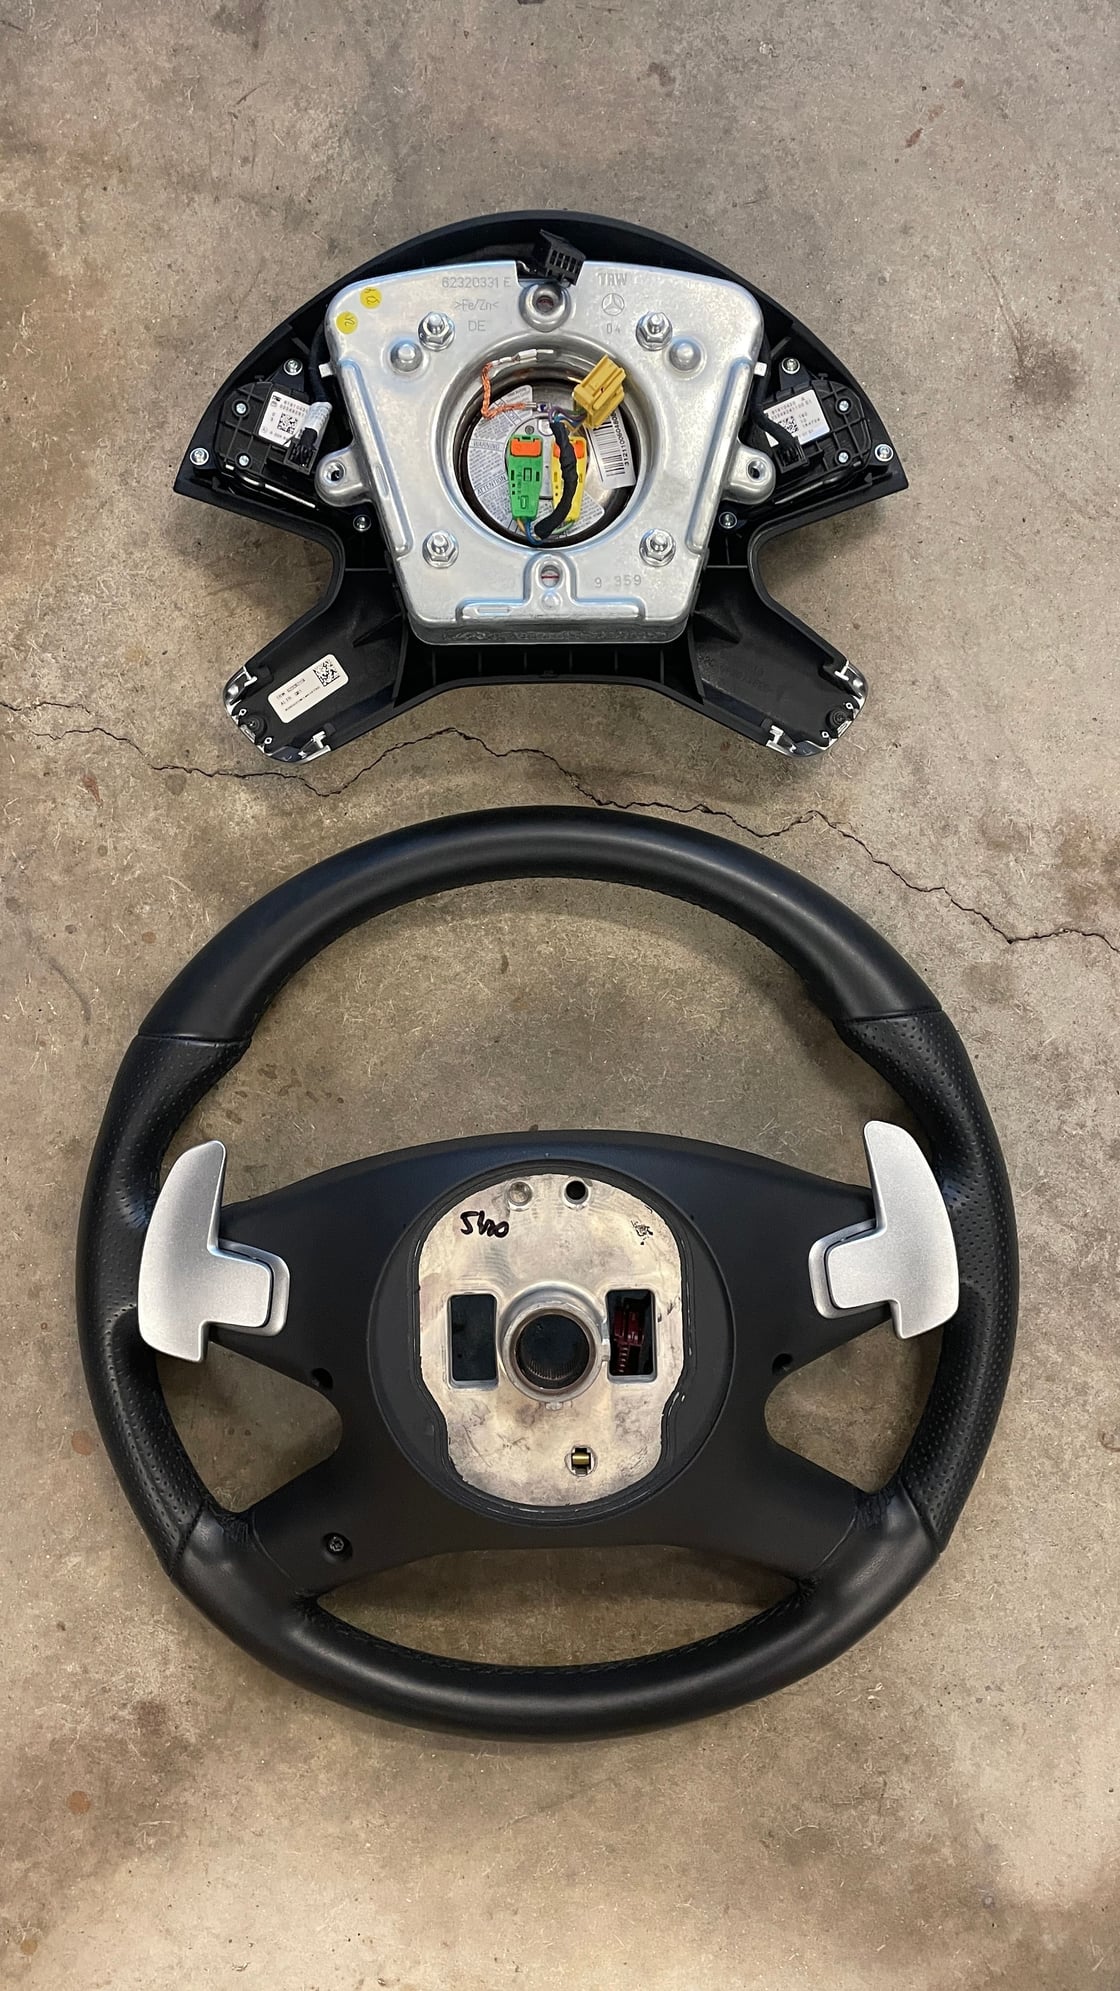 Steering/Suspension - w212 (2010-2011) E63 Steering wheel & Airbag - Used - 2010 to 2011 Mercedes-Benz E63 AMG - Asheville, NC 28804, United States